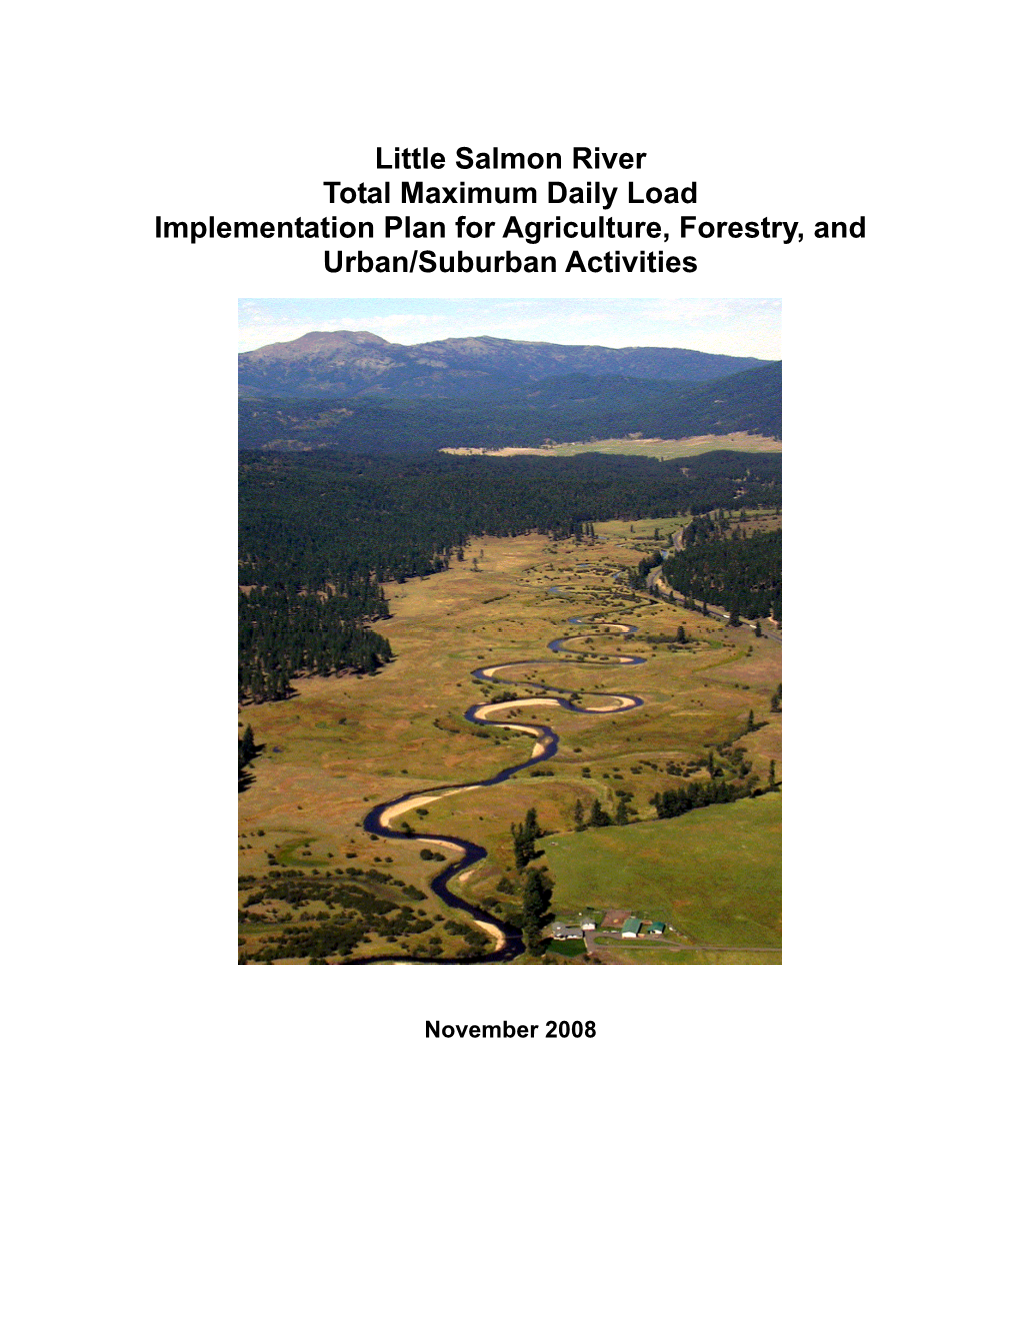 Little Salmon River Total Maximum Daily Load Implementation Plan for Agriculture, Forestry, and Urban/Suburban Activities